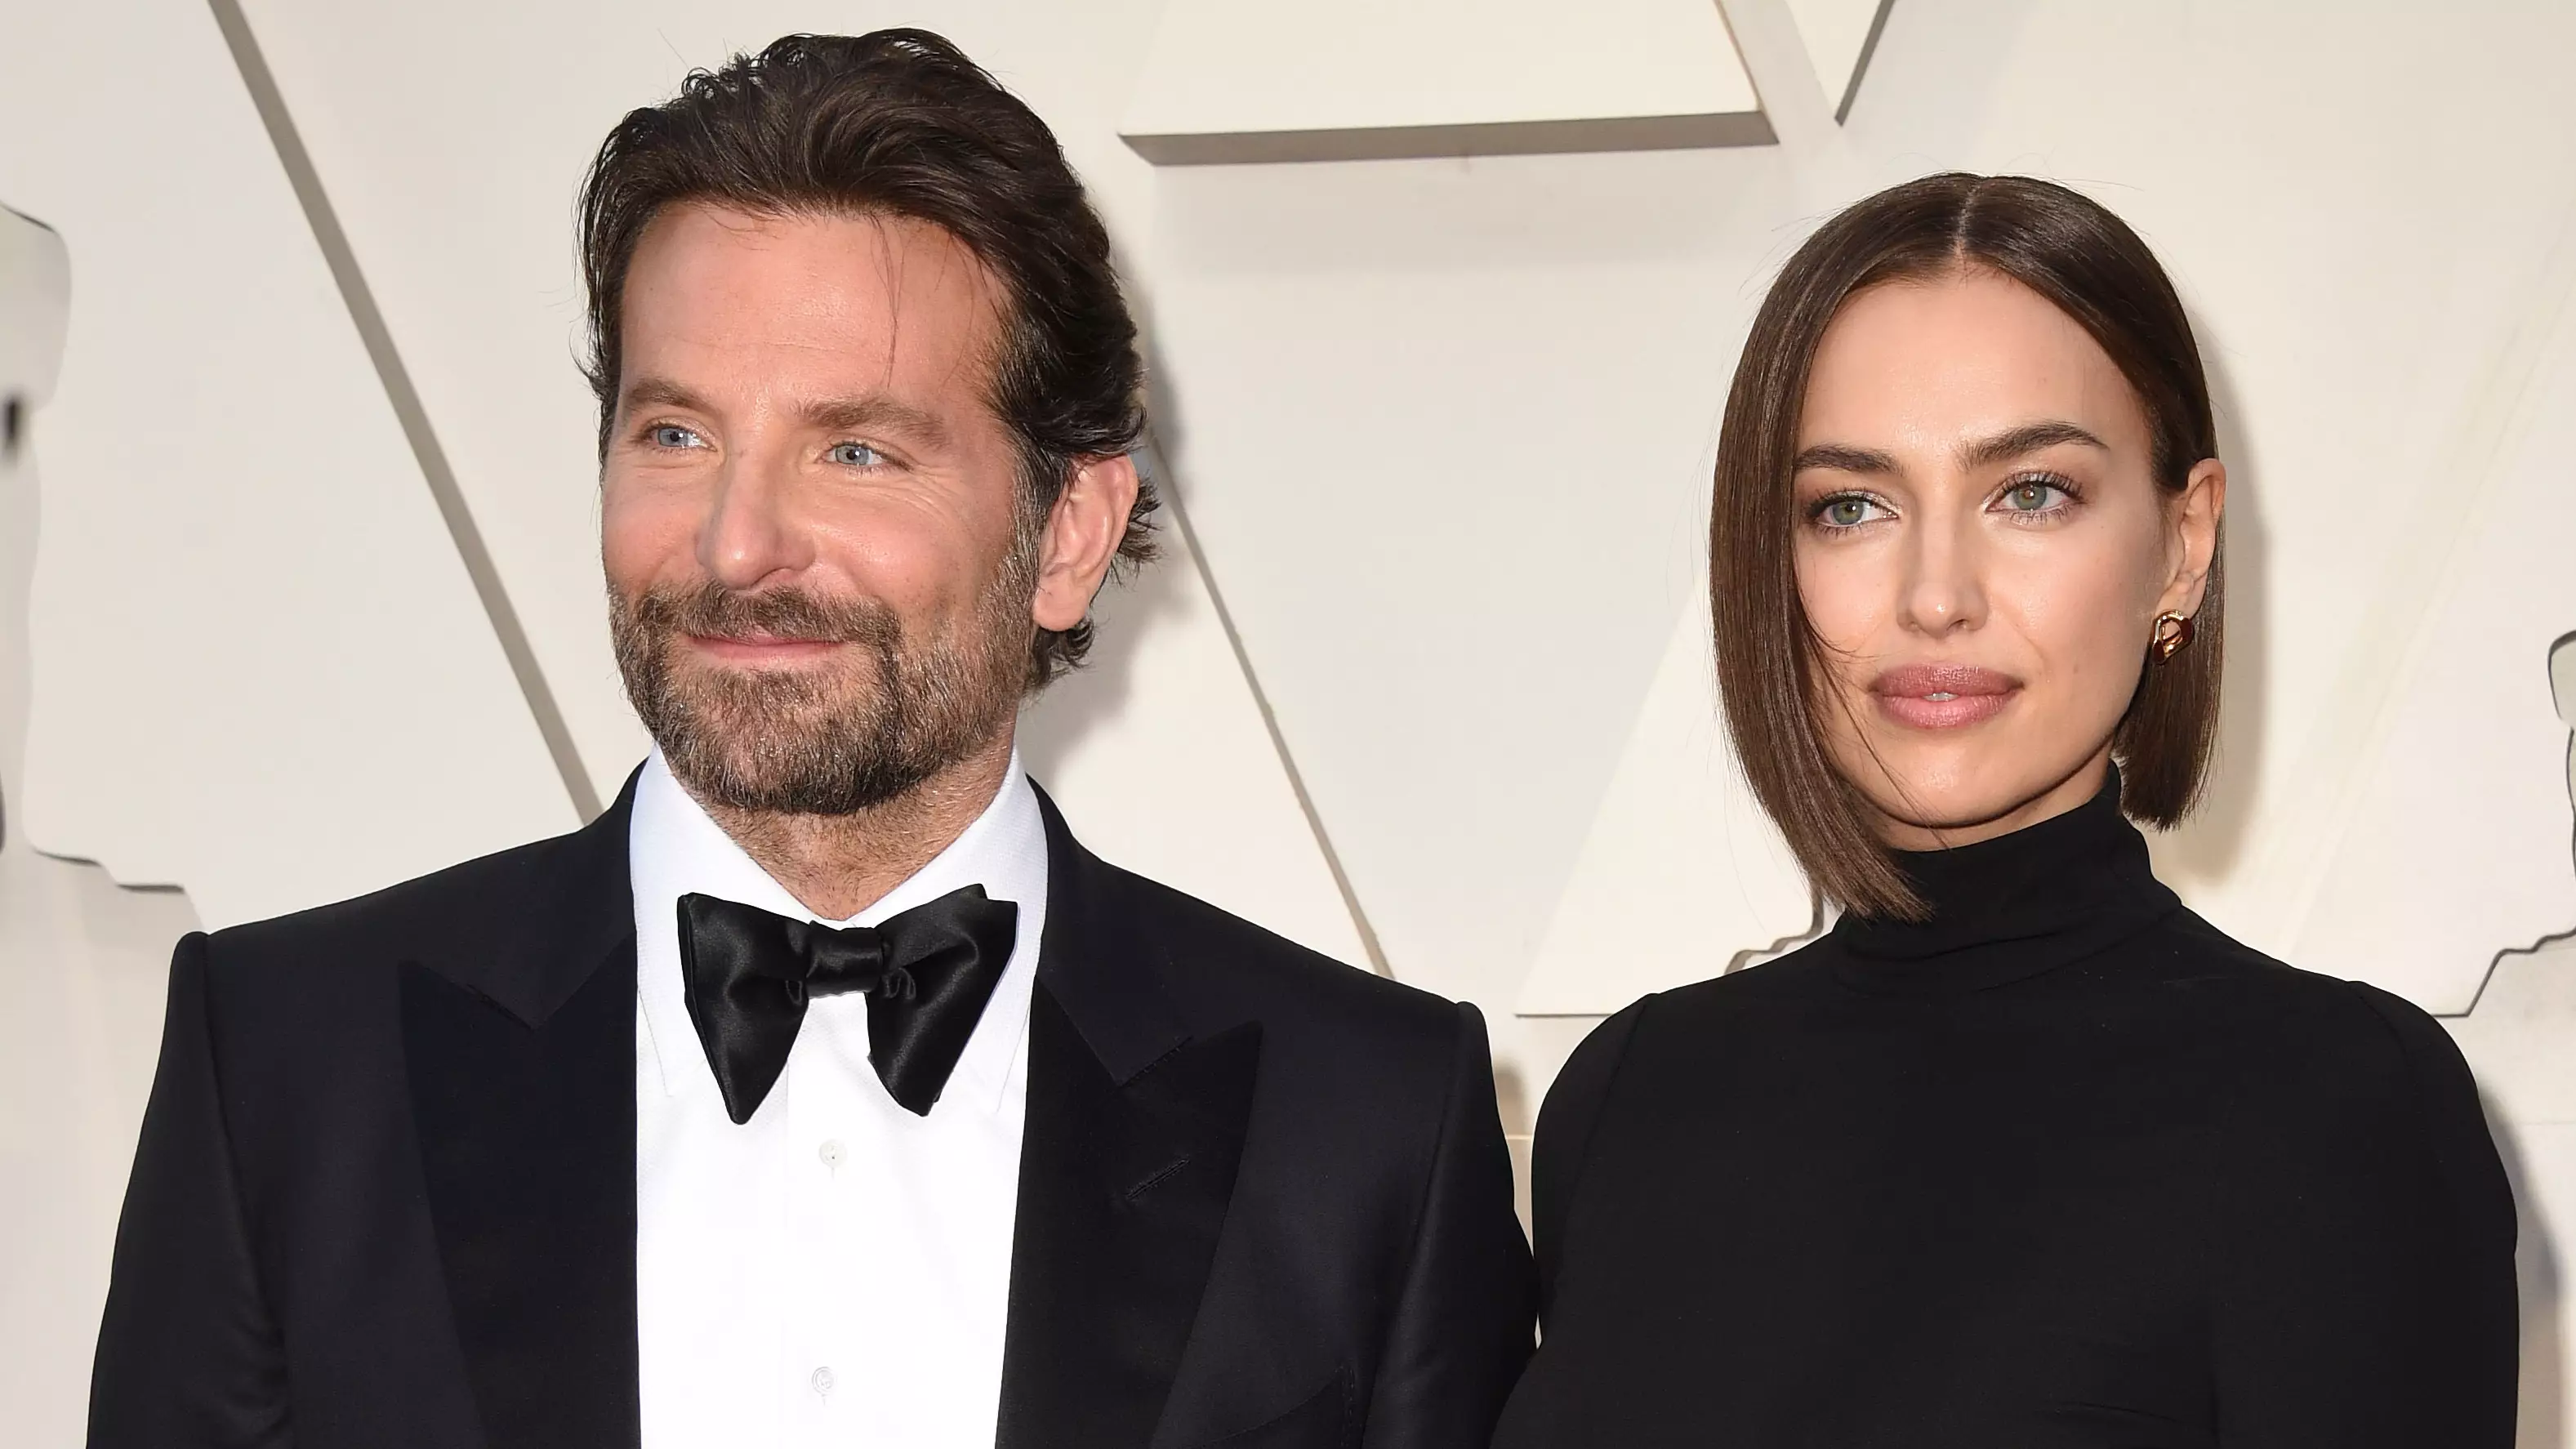 Everyone's Saying The Same Thing About Bradley Cooper And Irina Shayk's 'Break-Up'